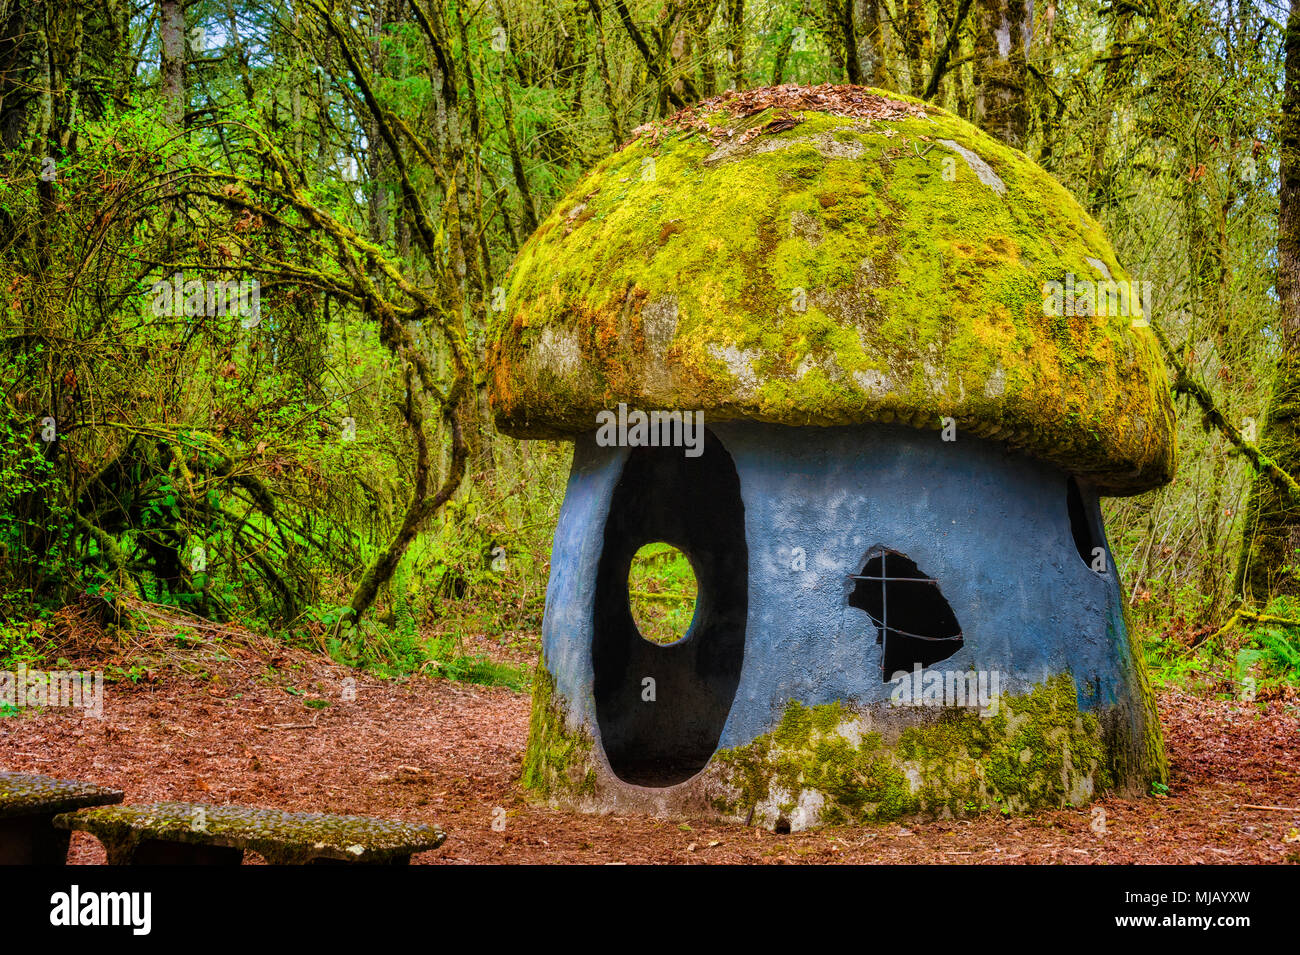 McMinnville, Oregon, USA - April 4, 2018:  Mushroom house in a nearly abandoned city park in McMinnville, Oregon Stock Photo